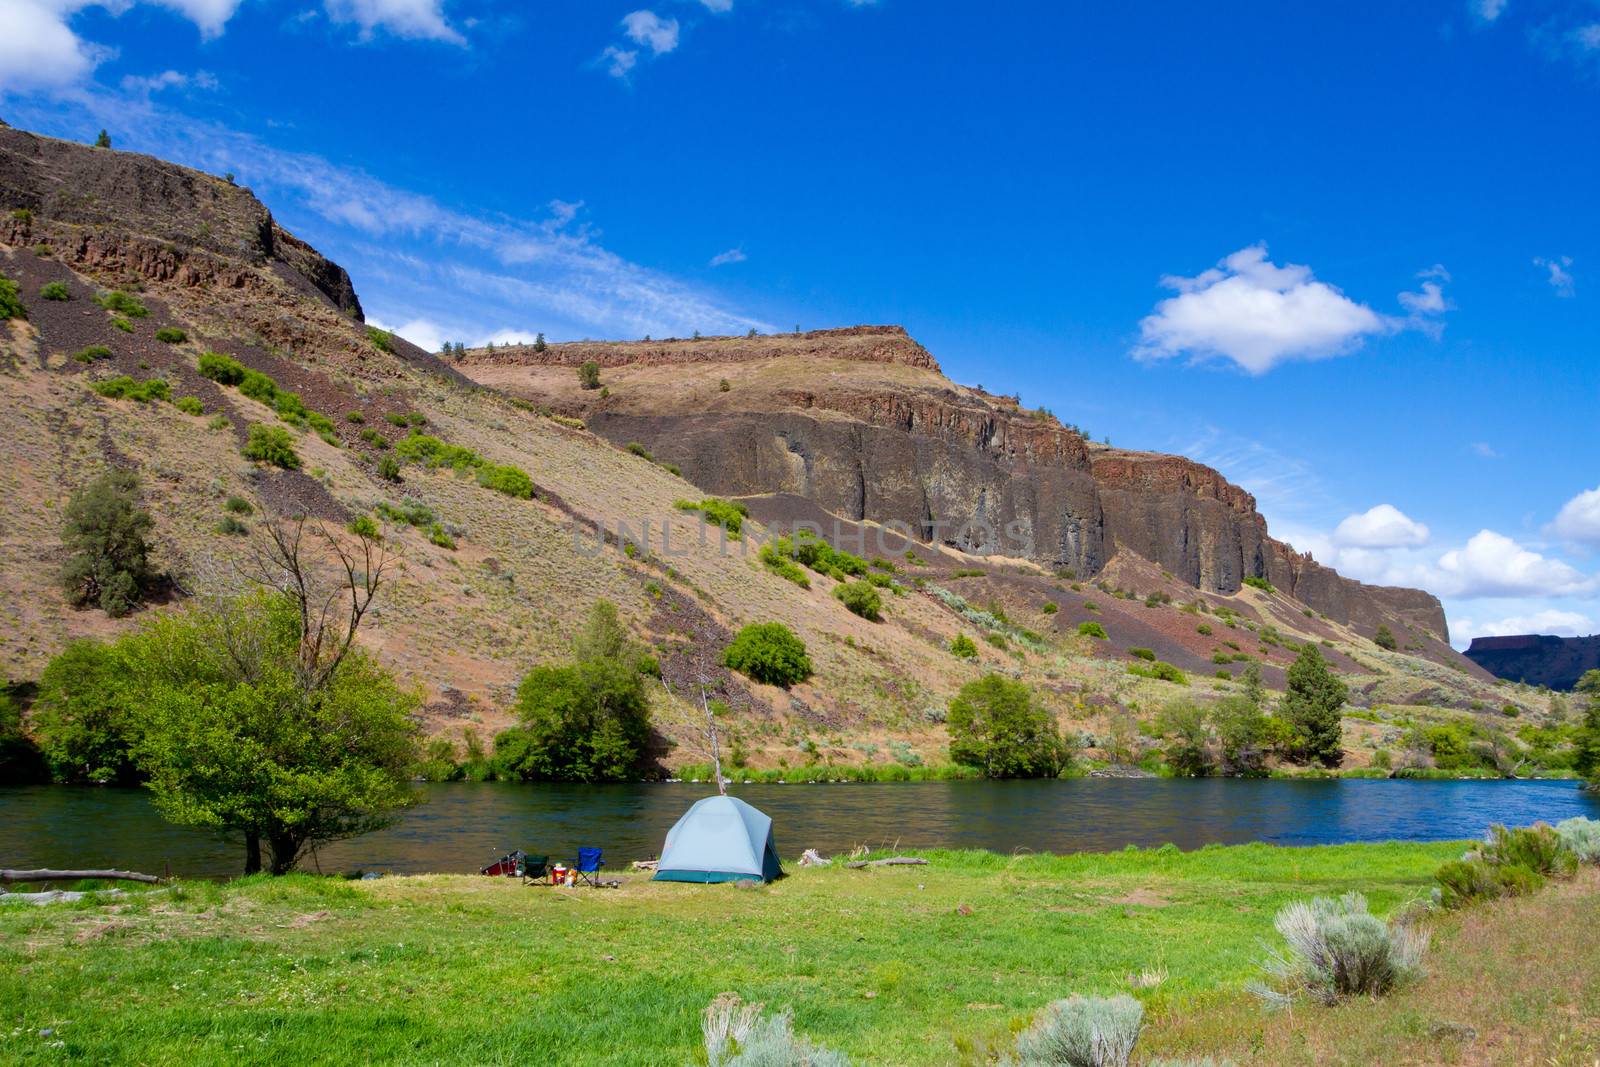 A rustic tent campsite on the Deschutes River in Oregon shows a tent setup next to a boat and the river. This is form a float camping trip.